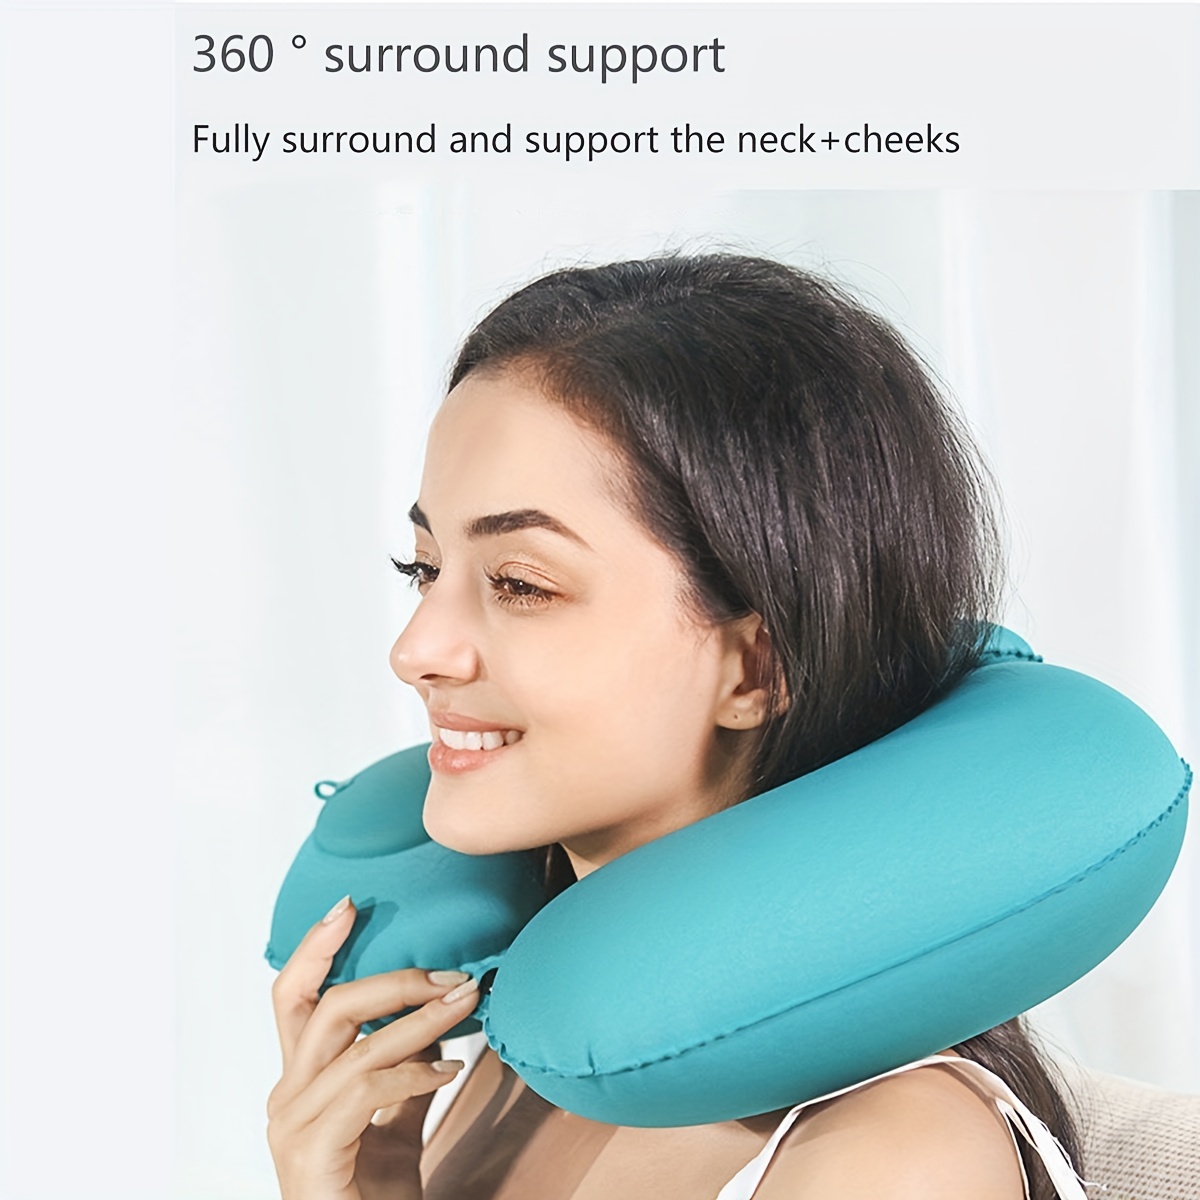 TRTL Travel Pillow Cool for Neck Support- Cooling Neck Pillow with Cushioning Foam for Stability and Comfort, Breathable Fabric, Lightweight and